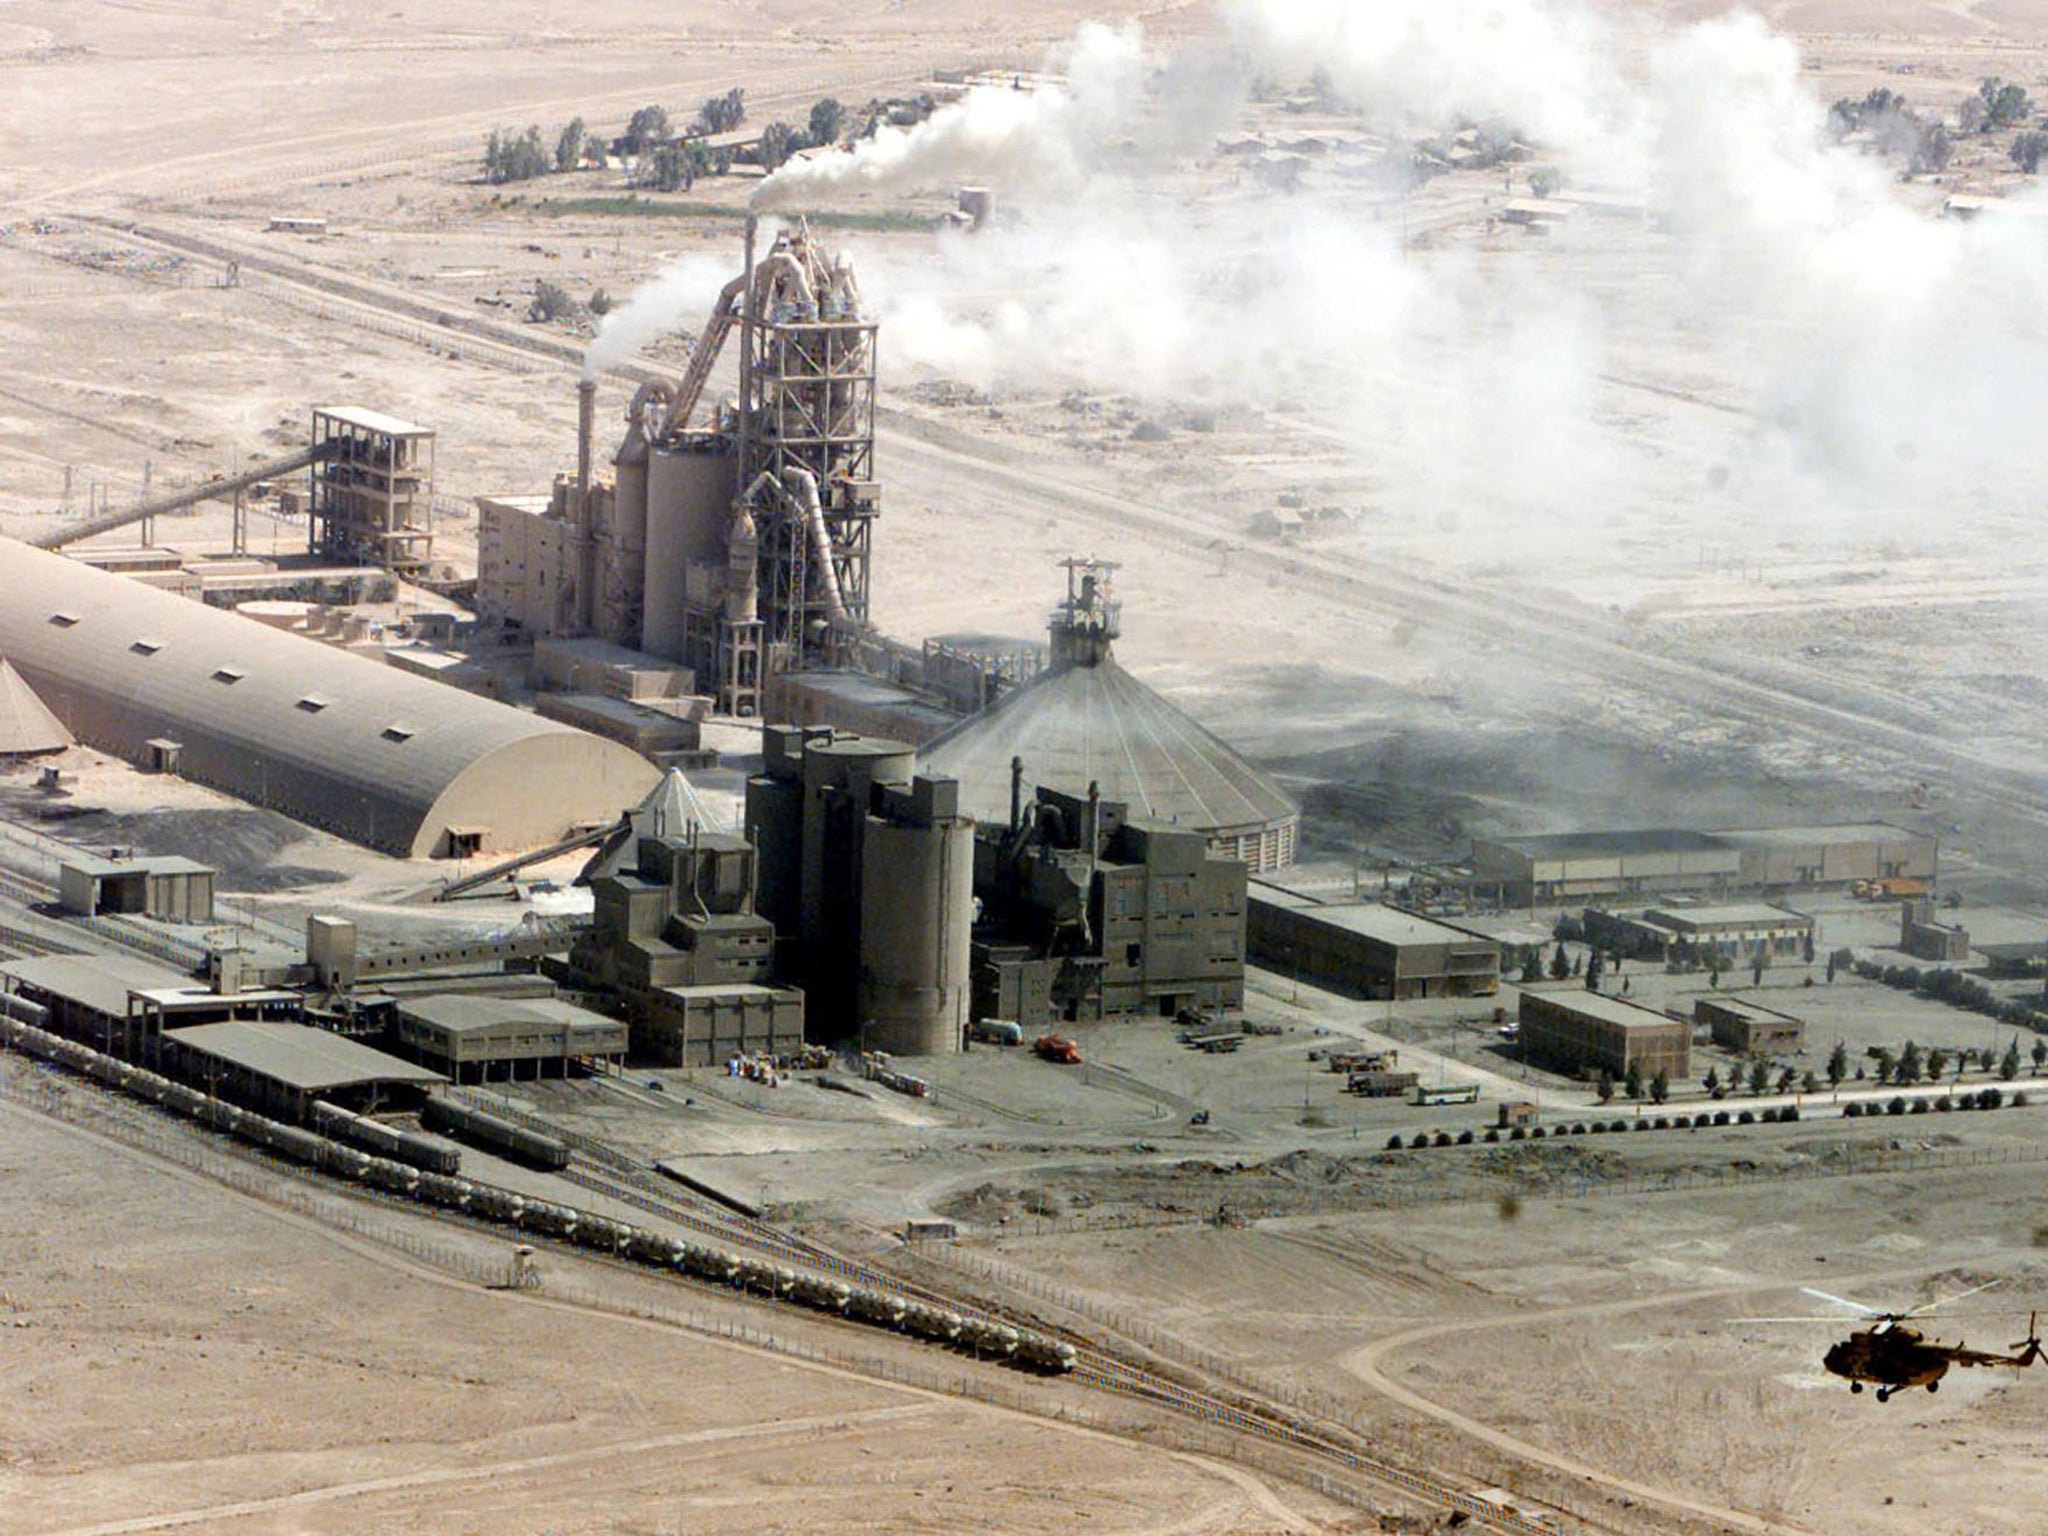 This phosphate plant at al-Qaim, northwest of Baghdad, housed a uranium extraction plant until it was destroyed during the 1991 Gulf war